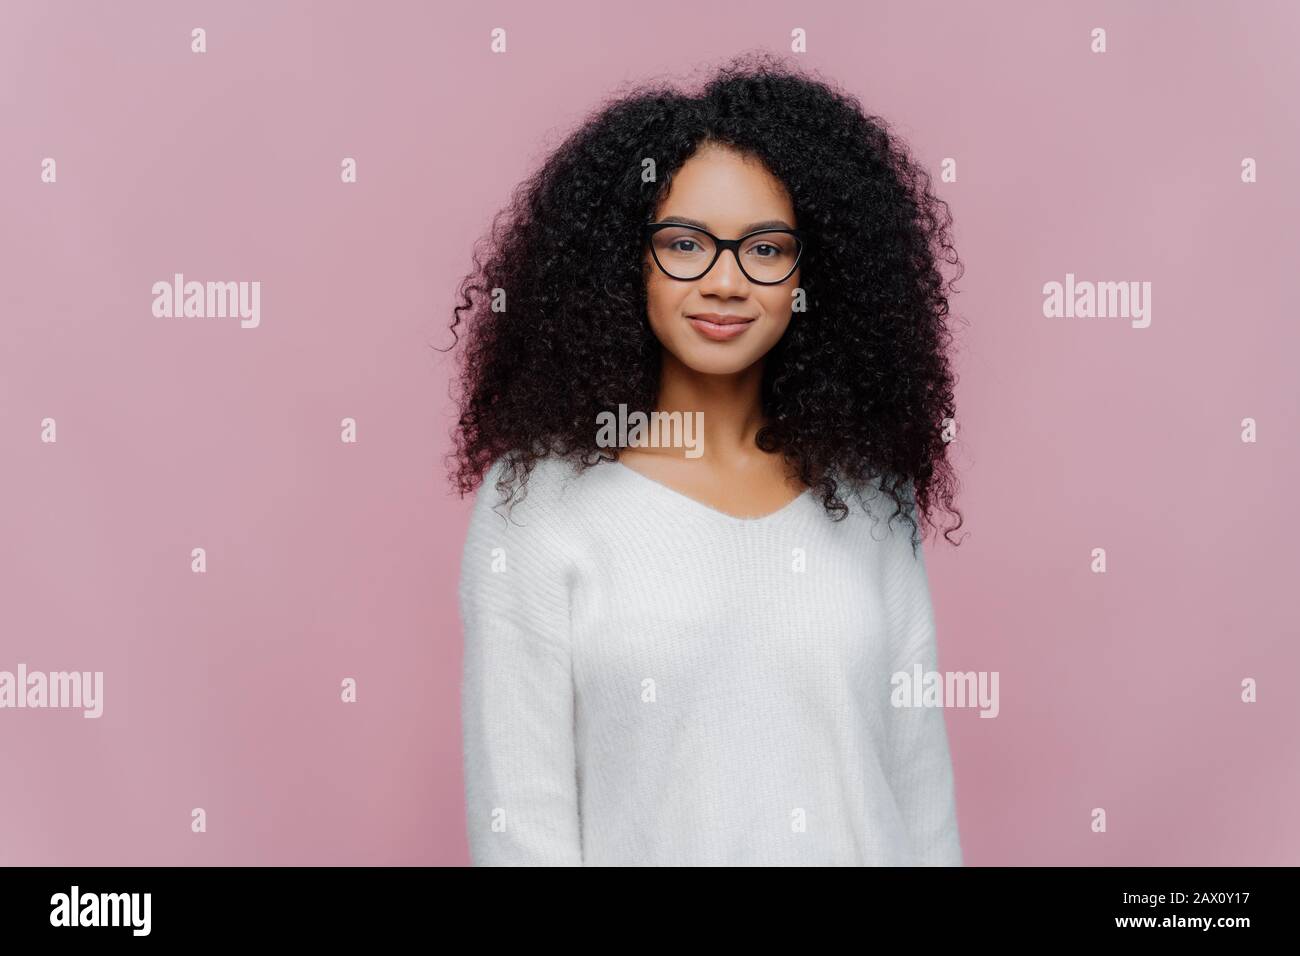 Half length shot of attractive African American woman looks through transparent glasses, white sweater, has serious calm expression, poses against vio Stock Photo